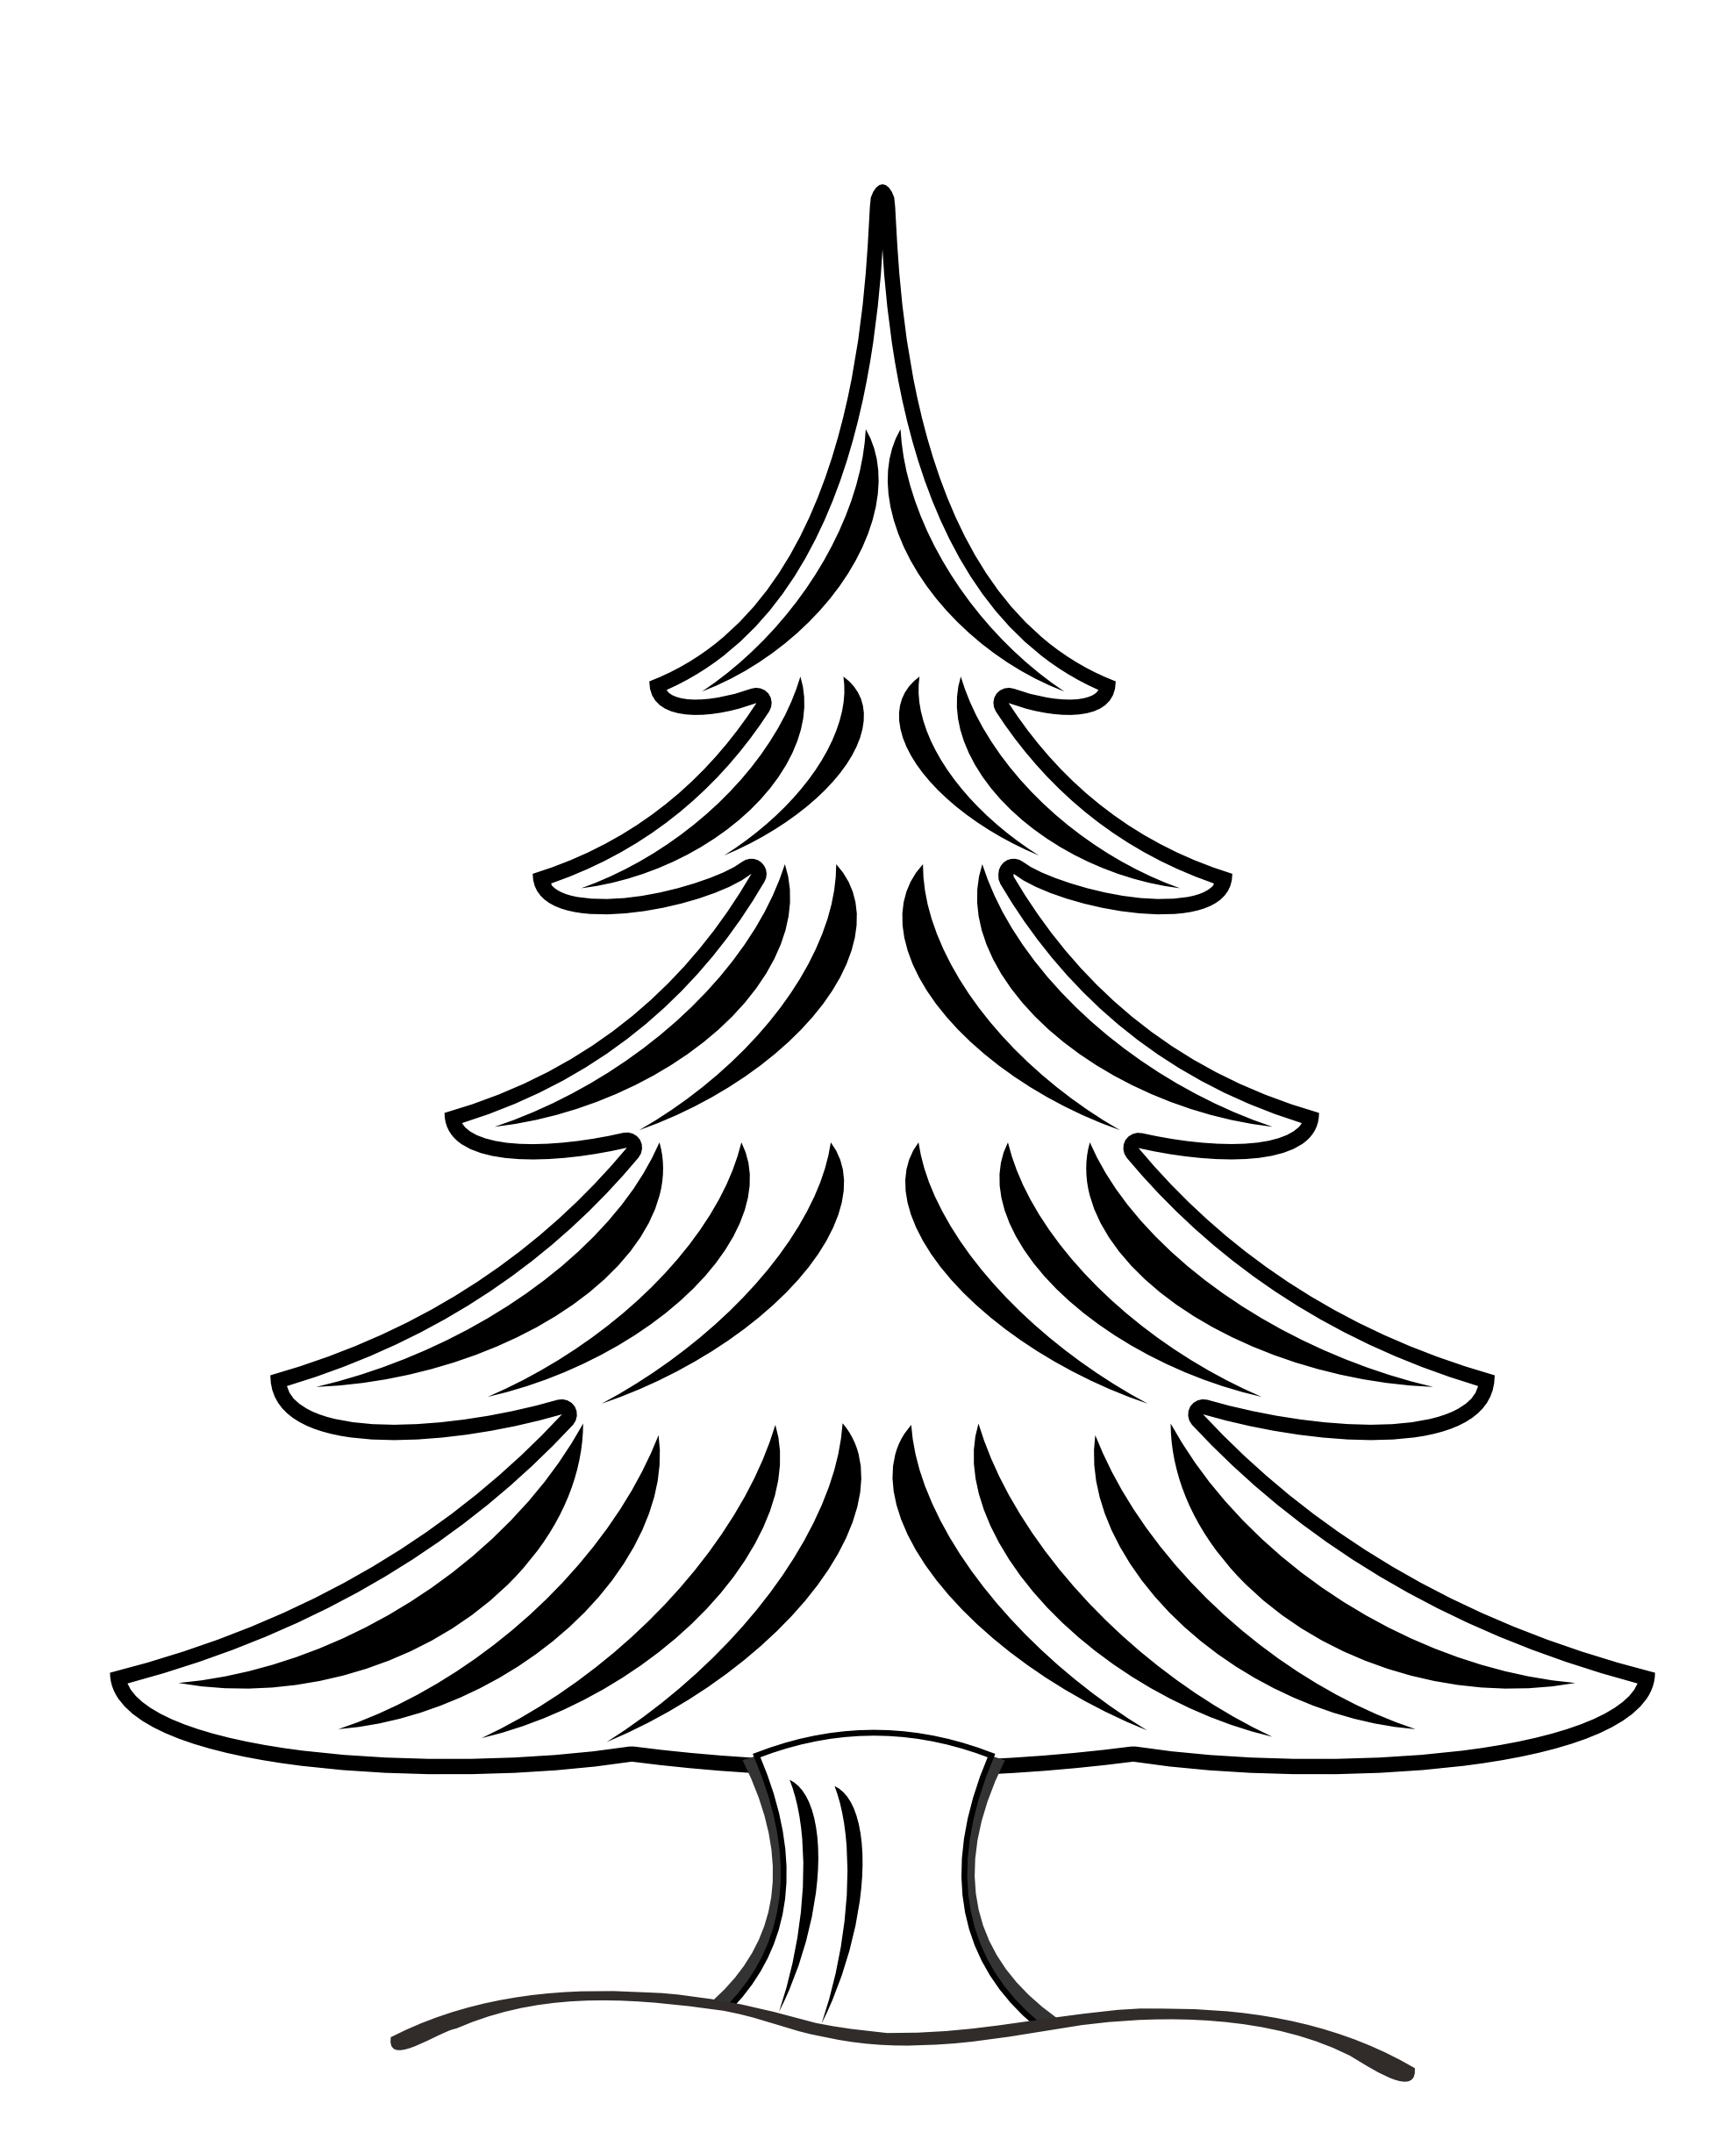 clipart tree black and white - photo #15